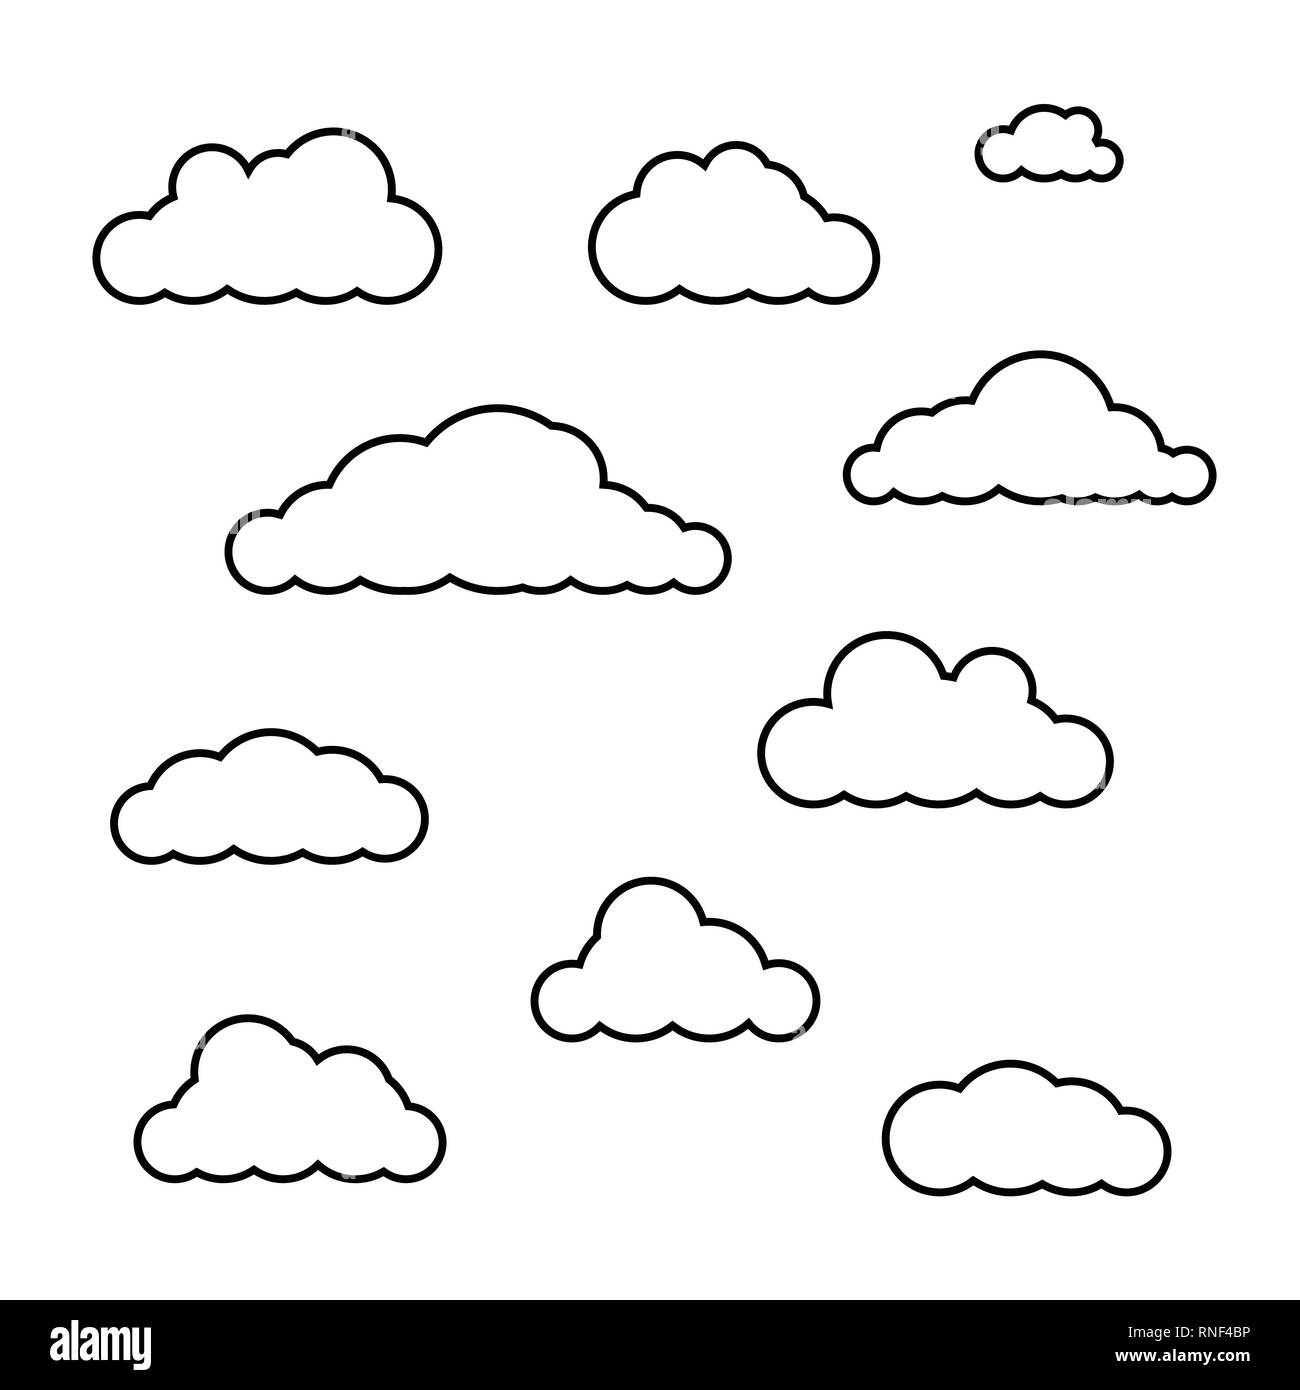 Vector clouds shapes set isolated on white background Stock Vector